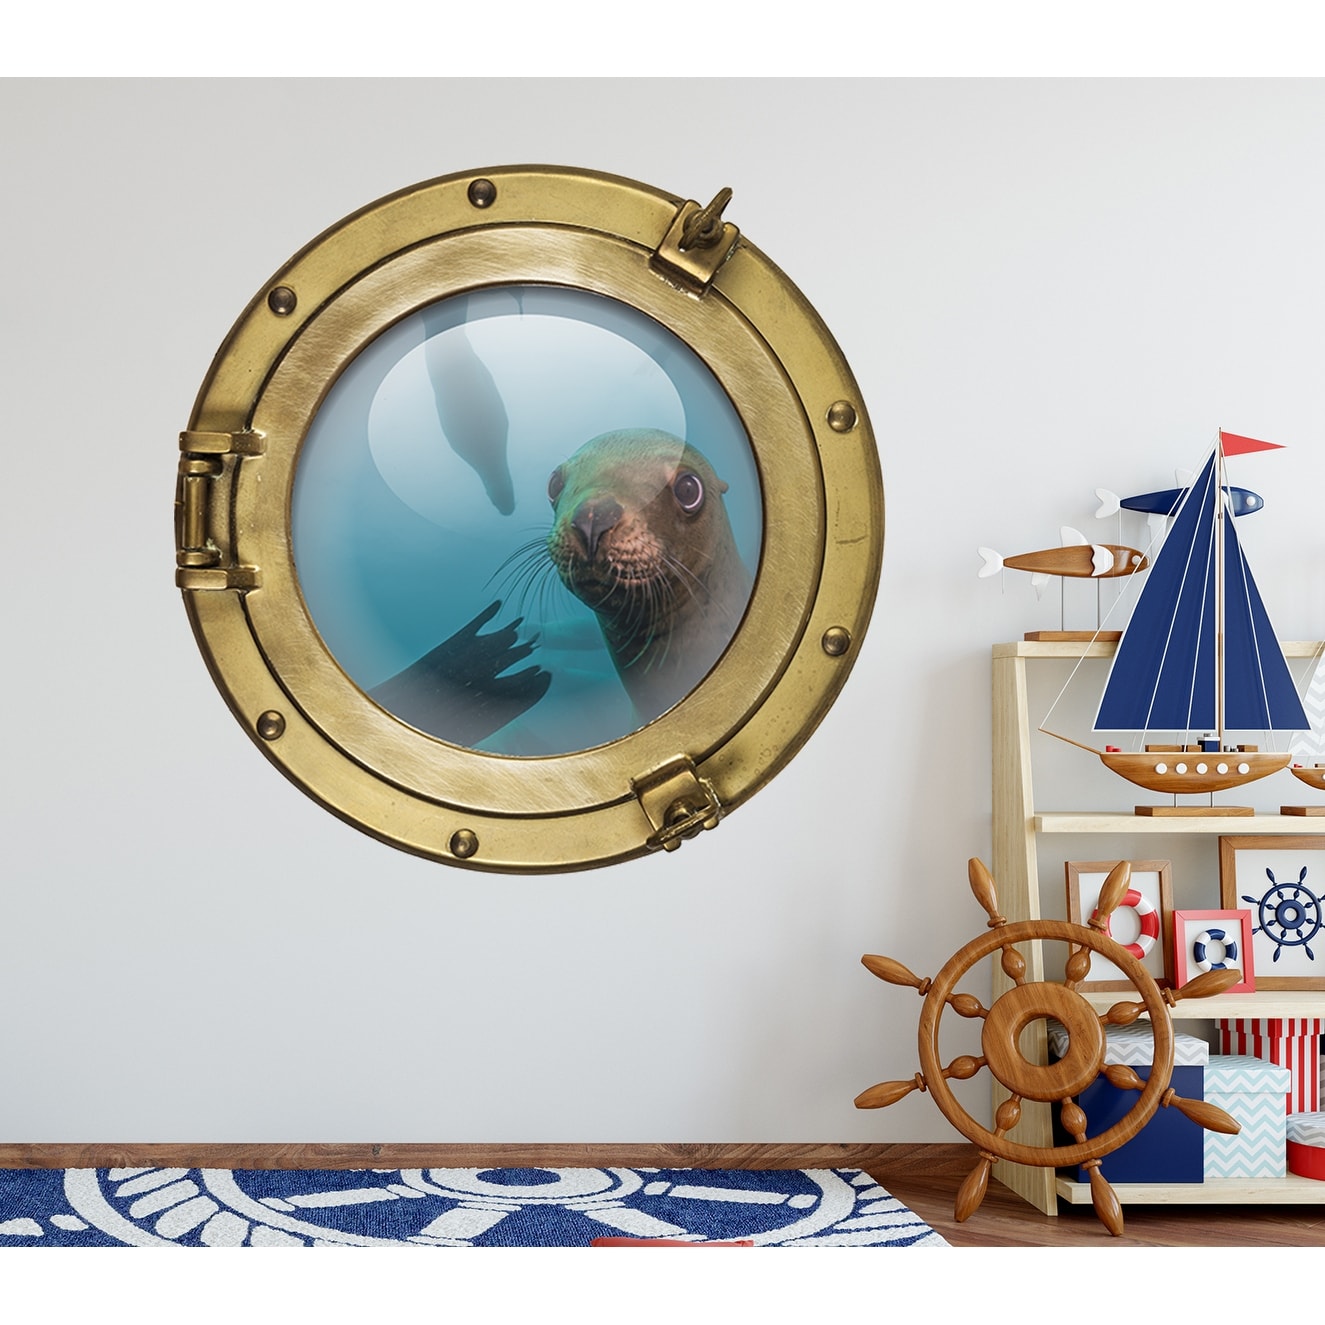 Huge 3D Porthole Enchanted Grandmas Cottage View Wall Stickers Decal 415 